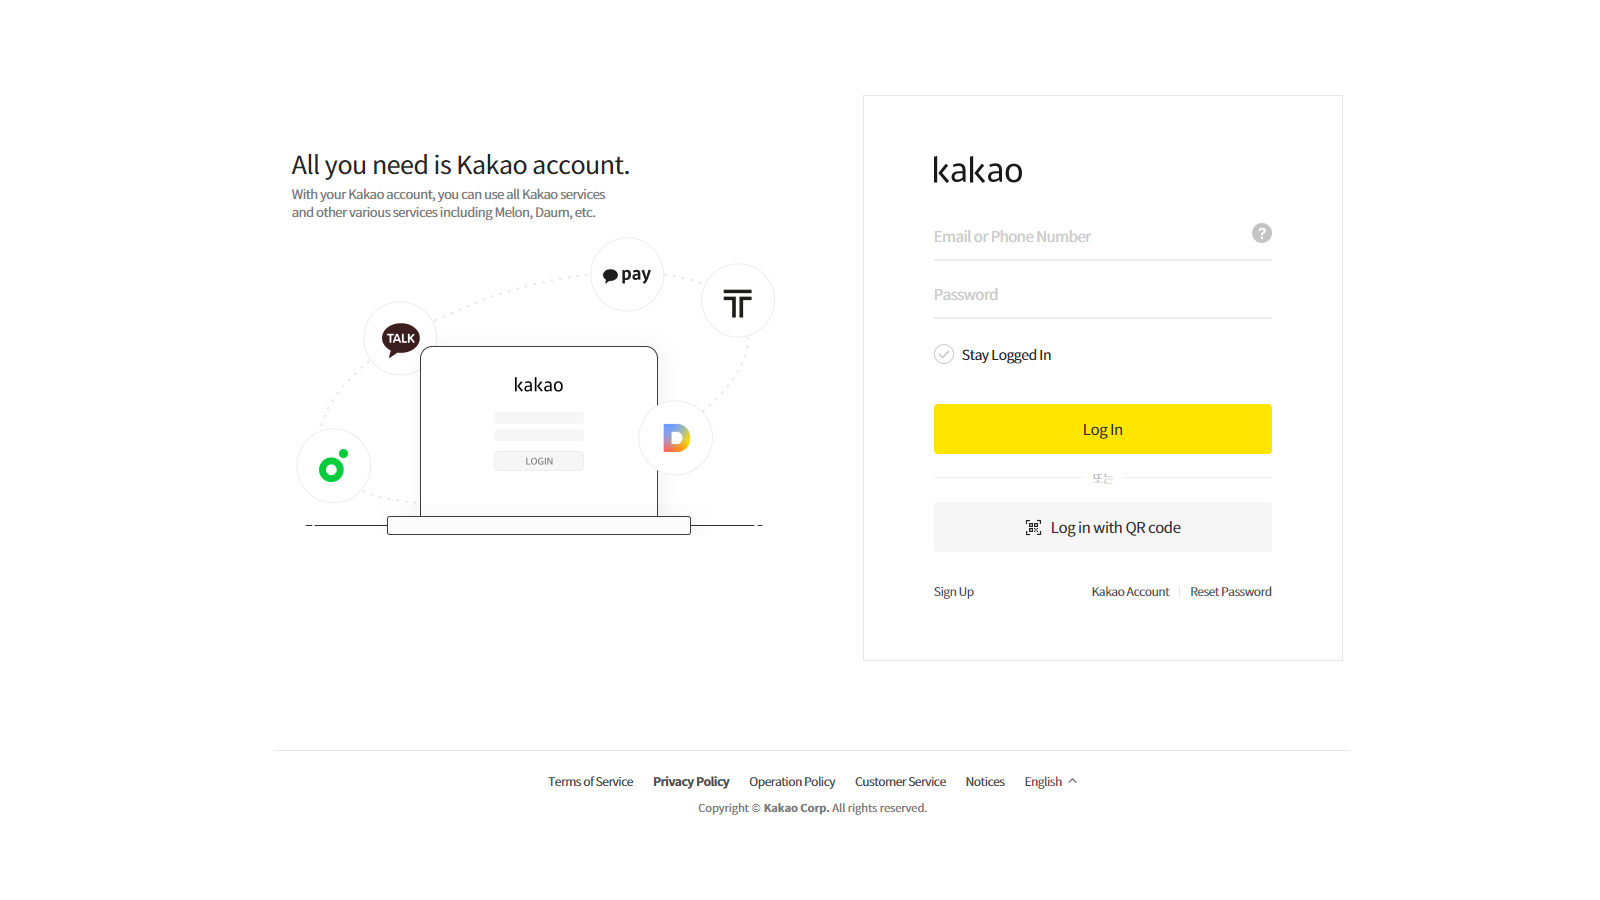 kakaotalk sign in with different email